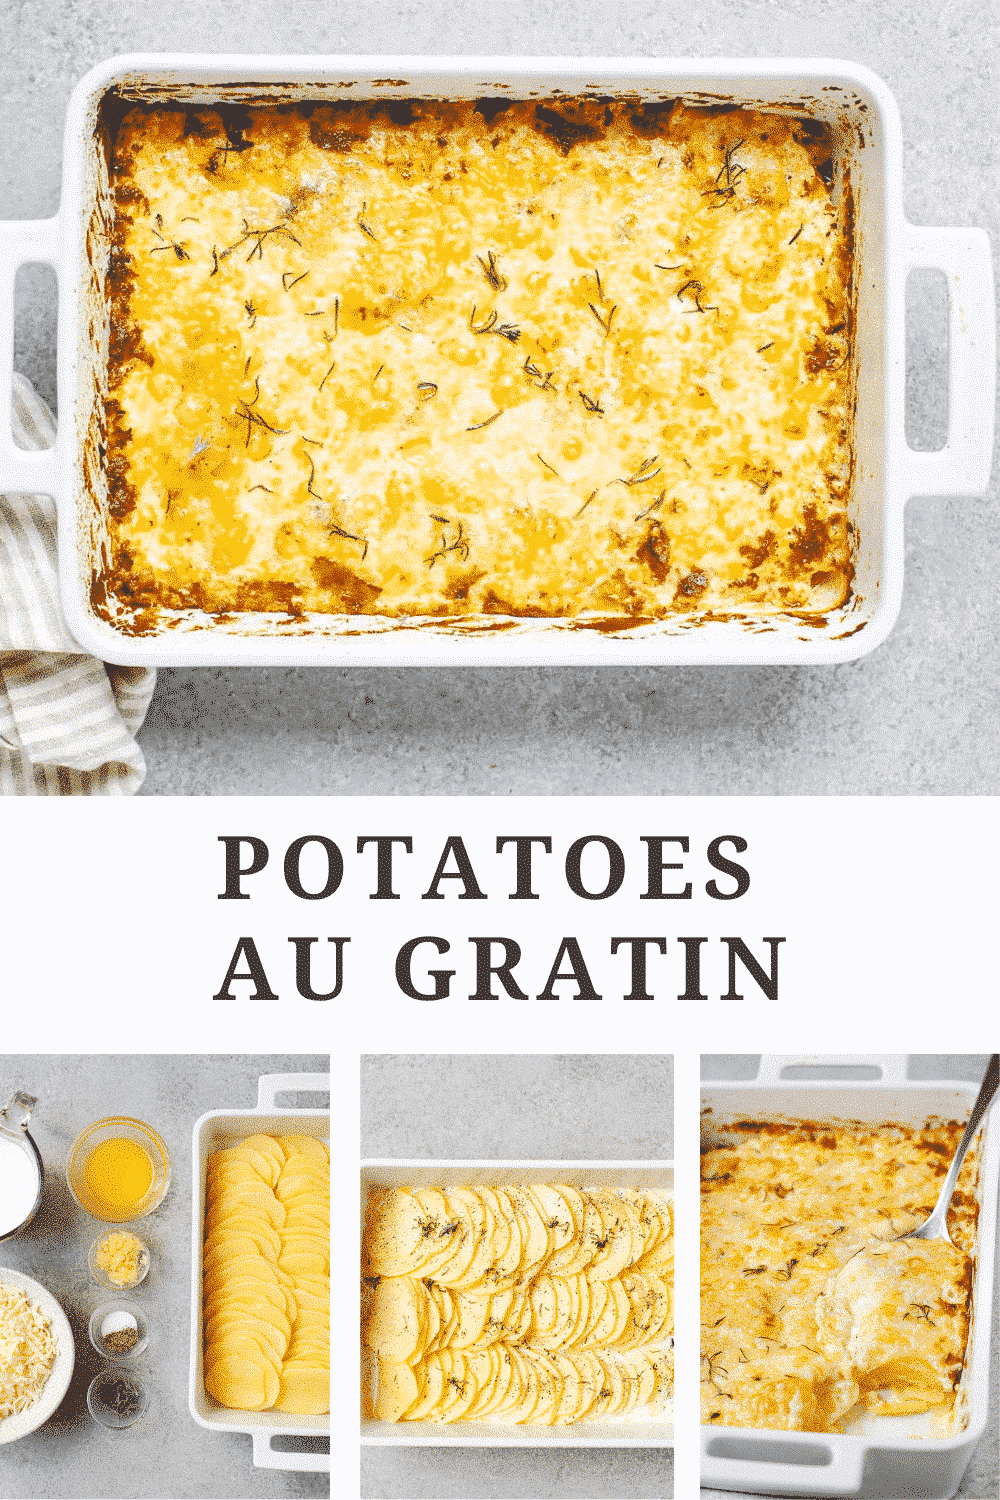 titled photo collage (and shown): Potatoes au gratin